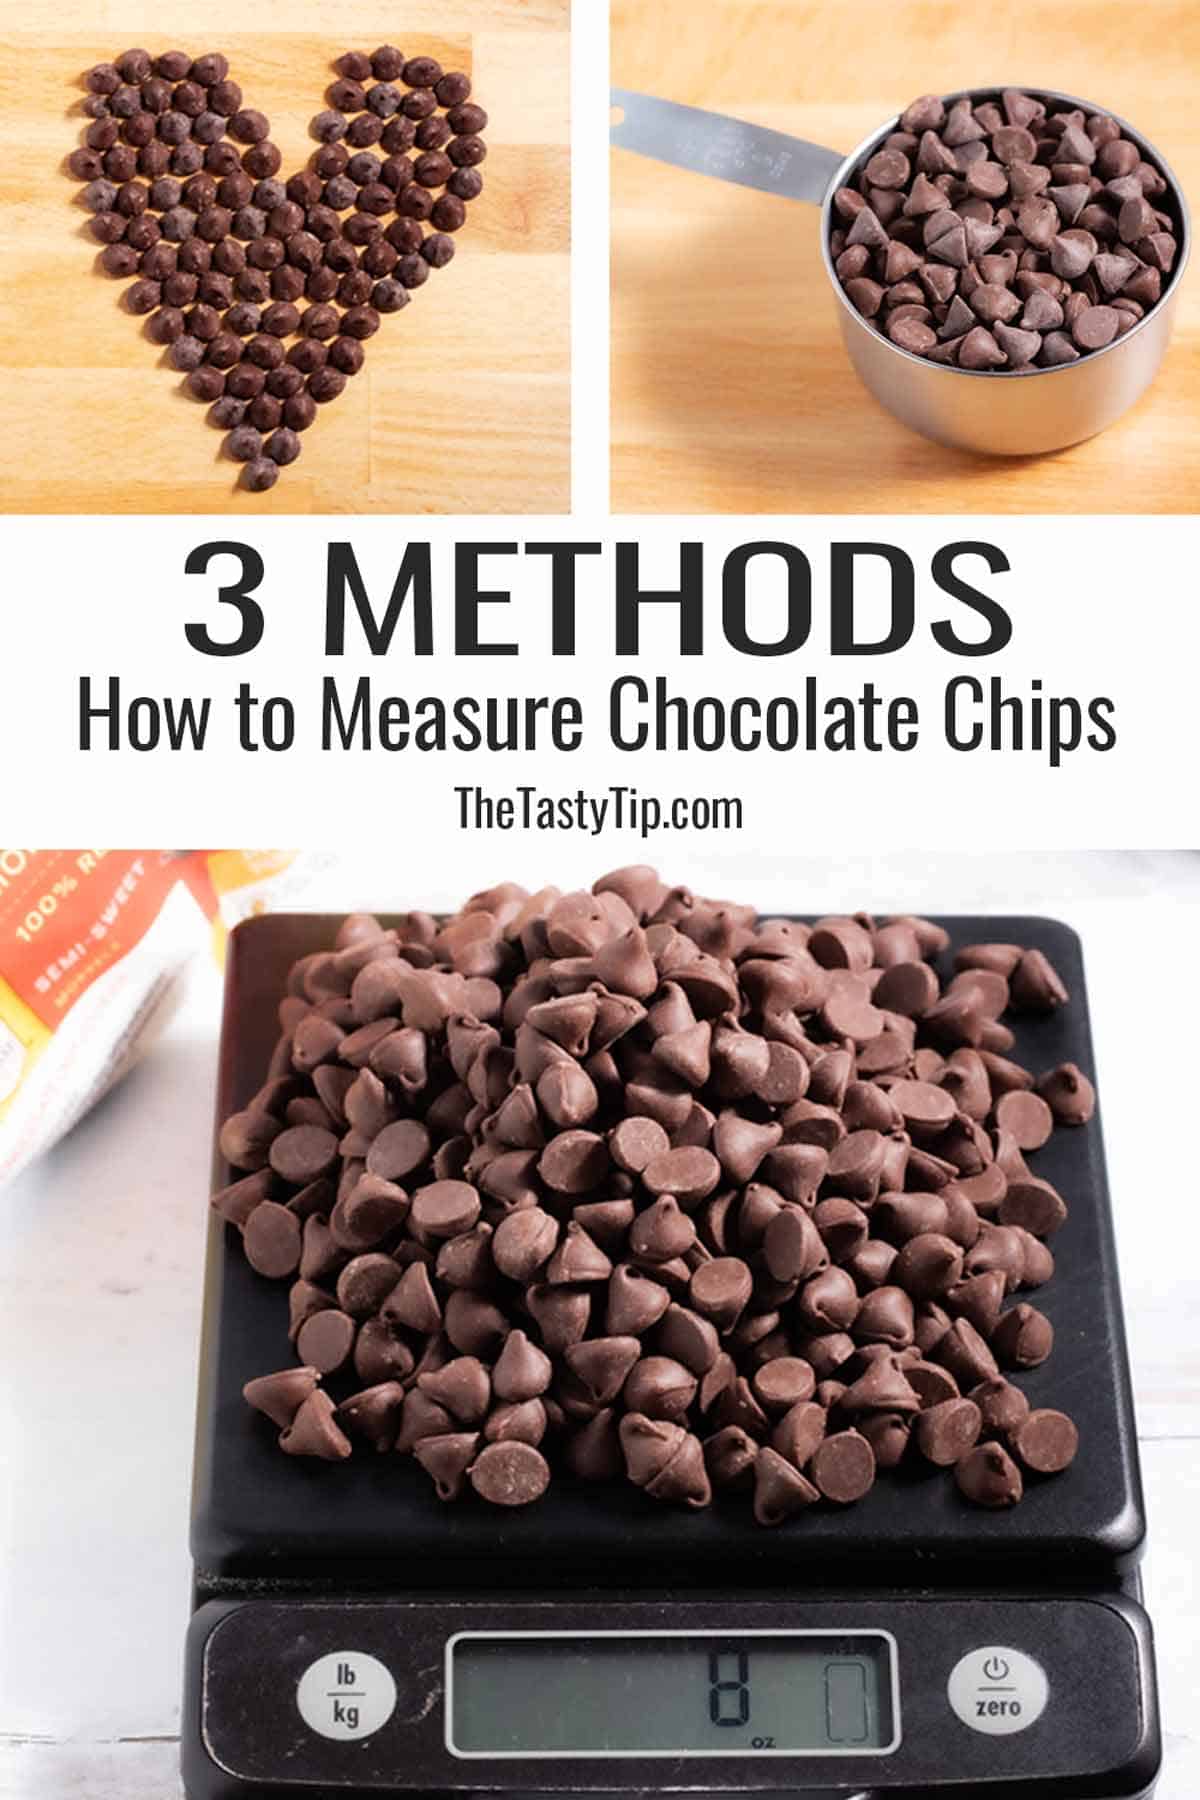 Chocolate chips laid out in a heart shape, cup of chocolate chips, and chocolate chips on a kitchen scale.